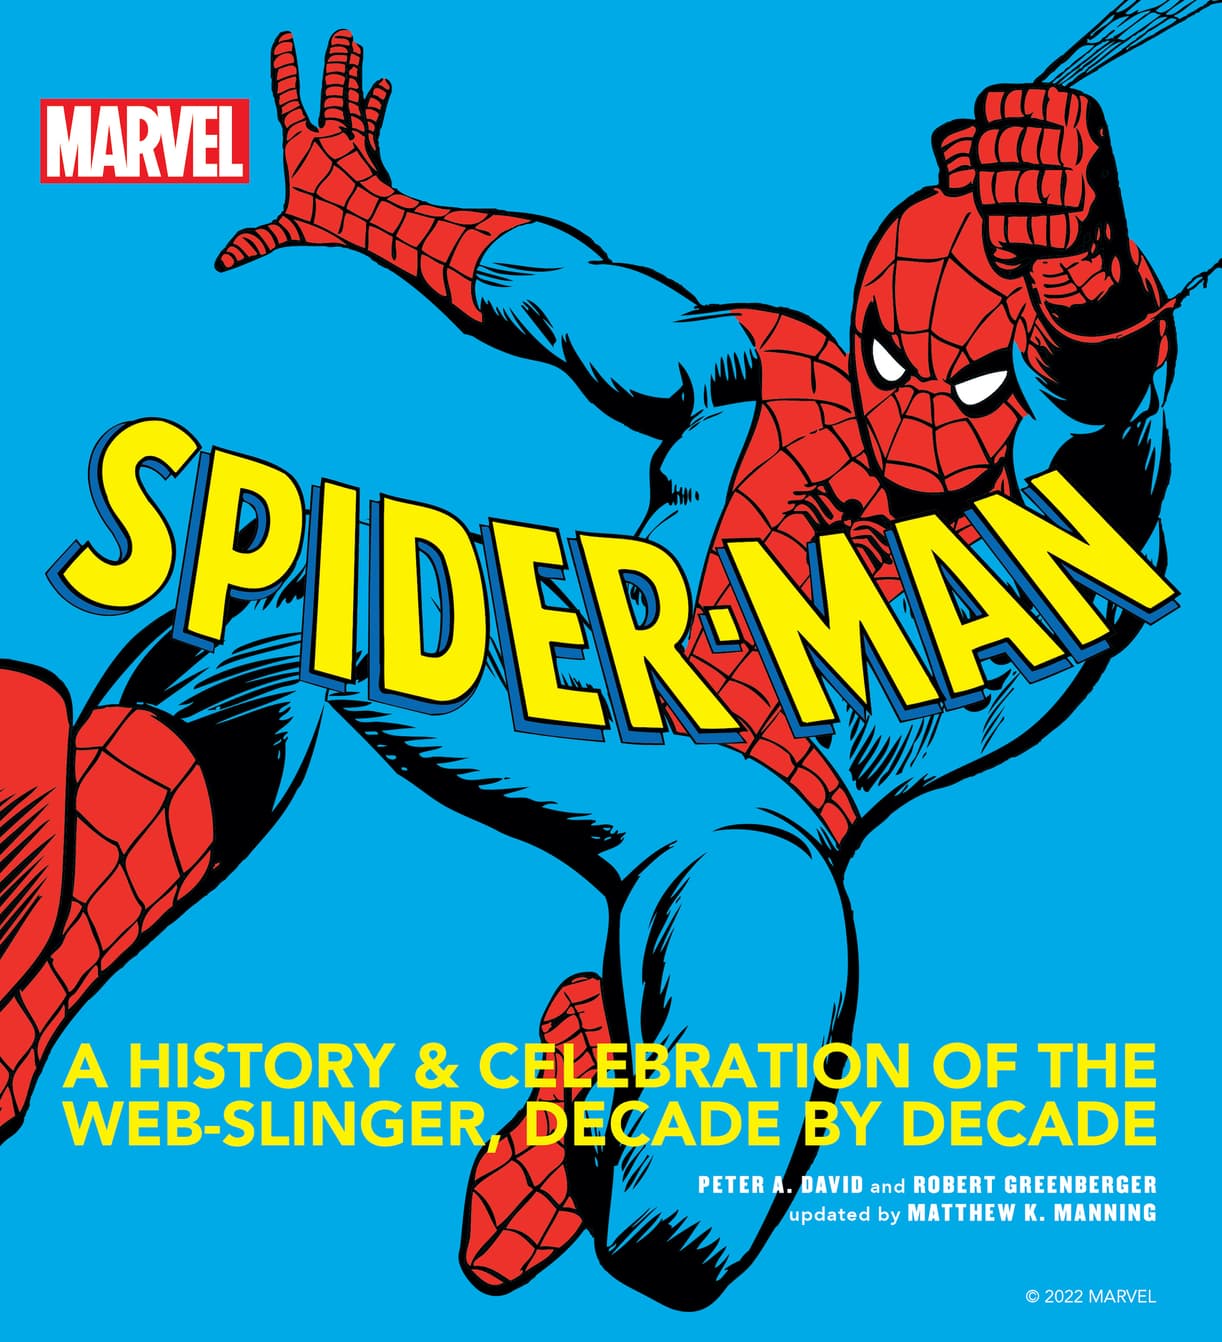 Spider-Man: A History and Celebration of the Web-Slinger, Decade by Decade